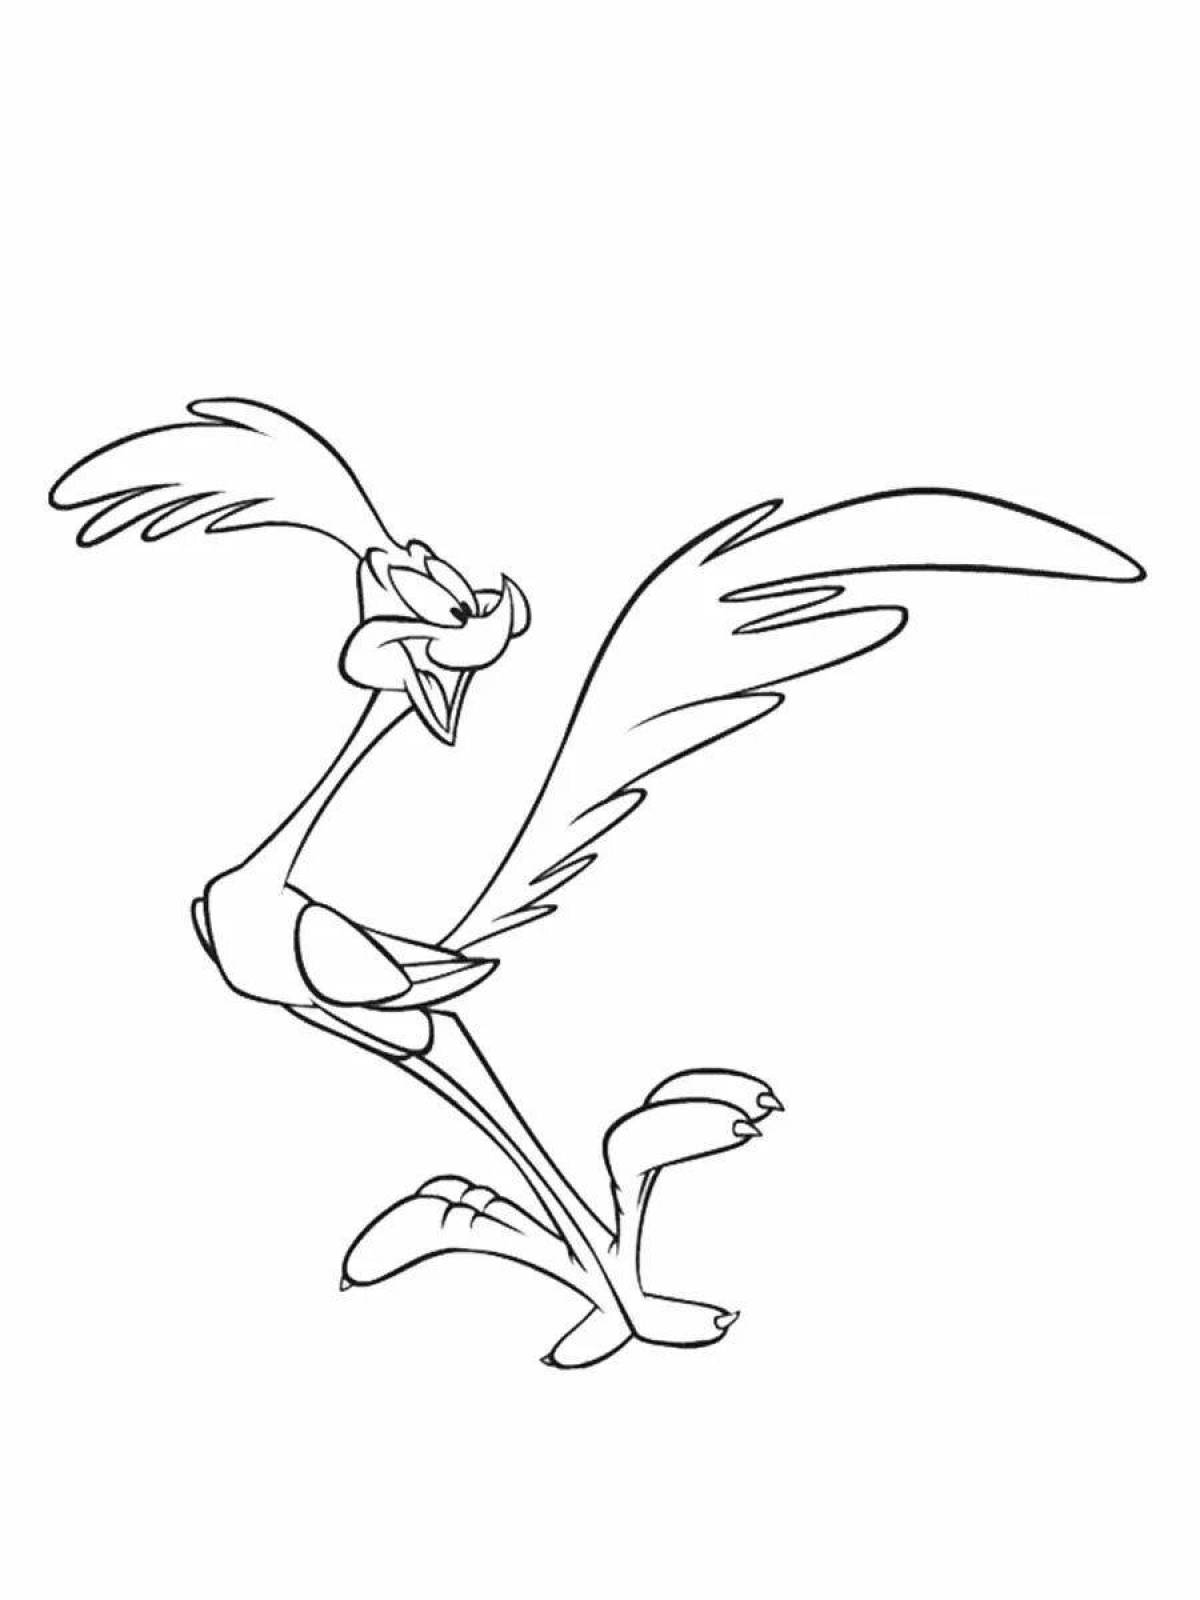 Color-frenzy road runner coloring book